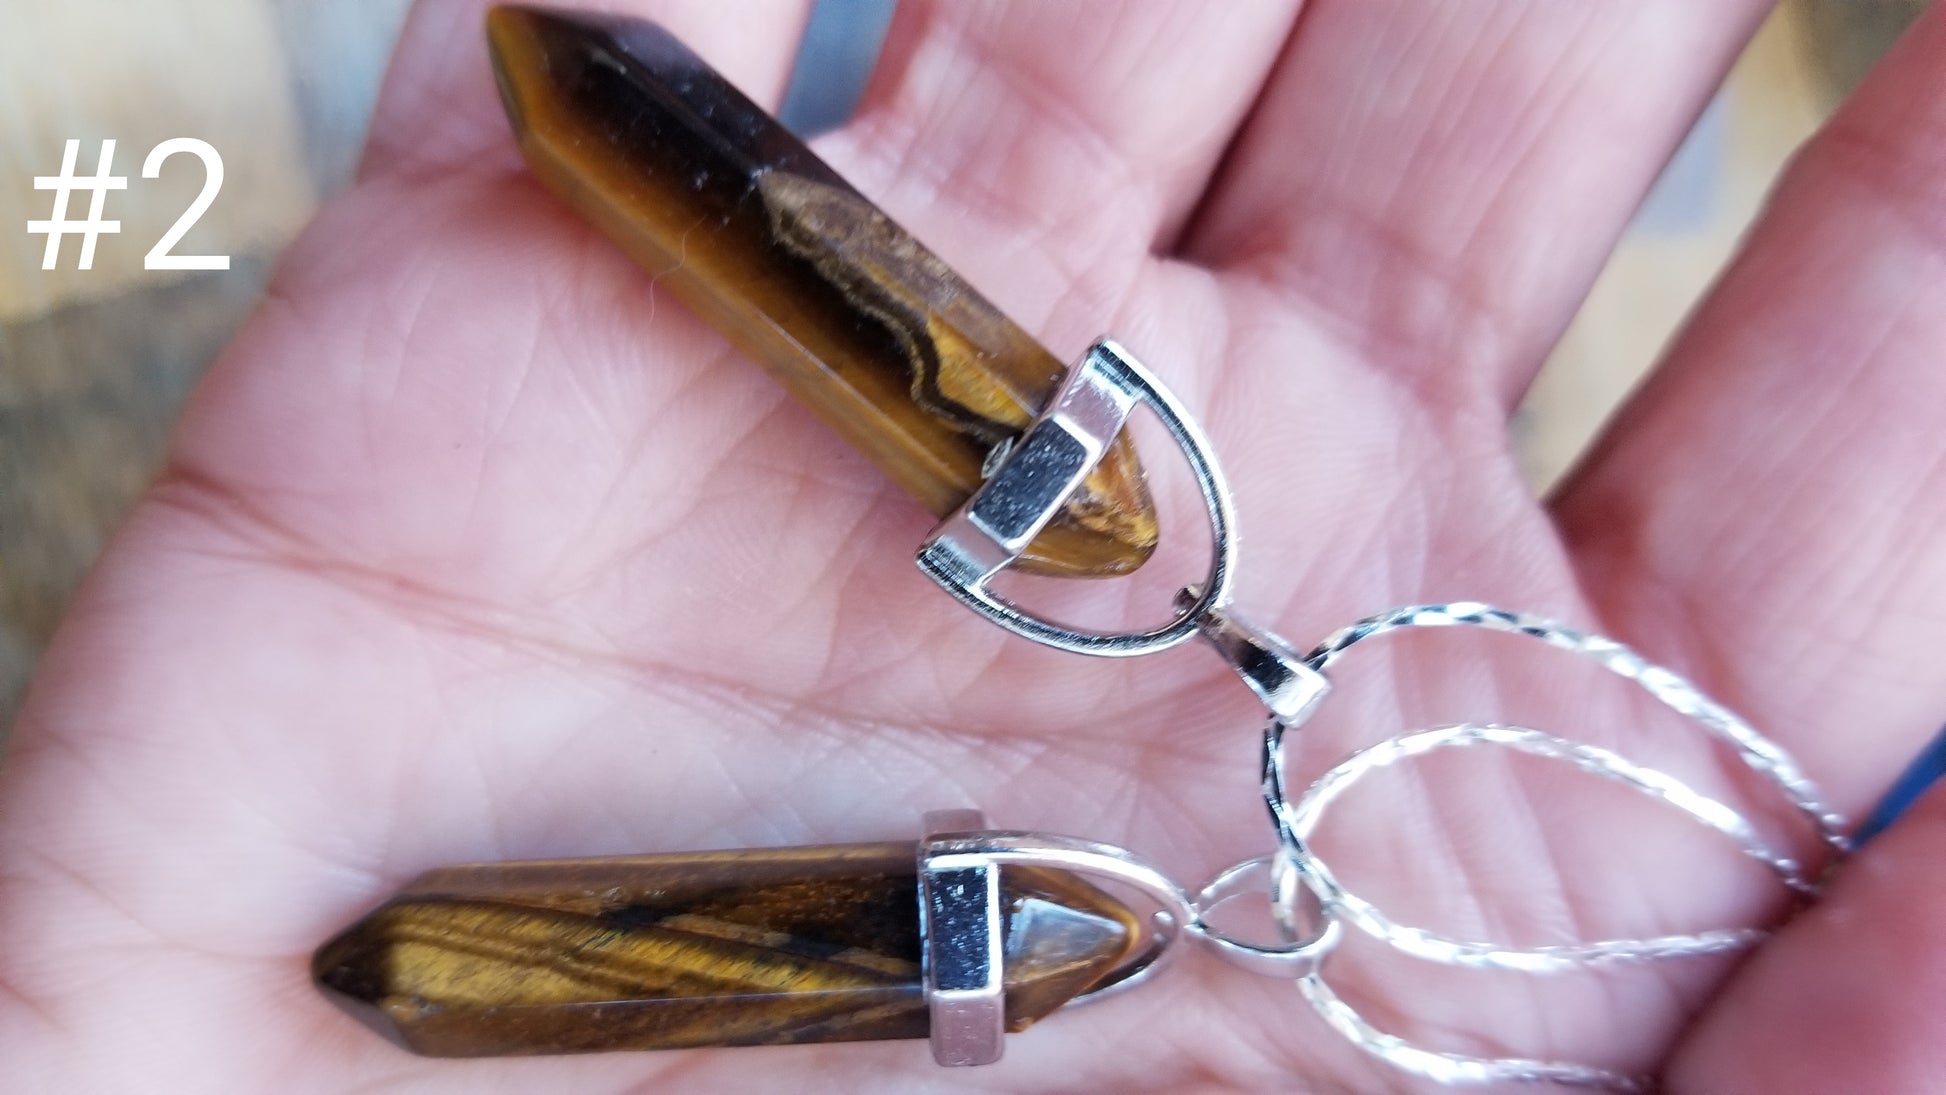 tiger's eye will vary from one pendent yo the next